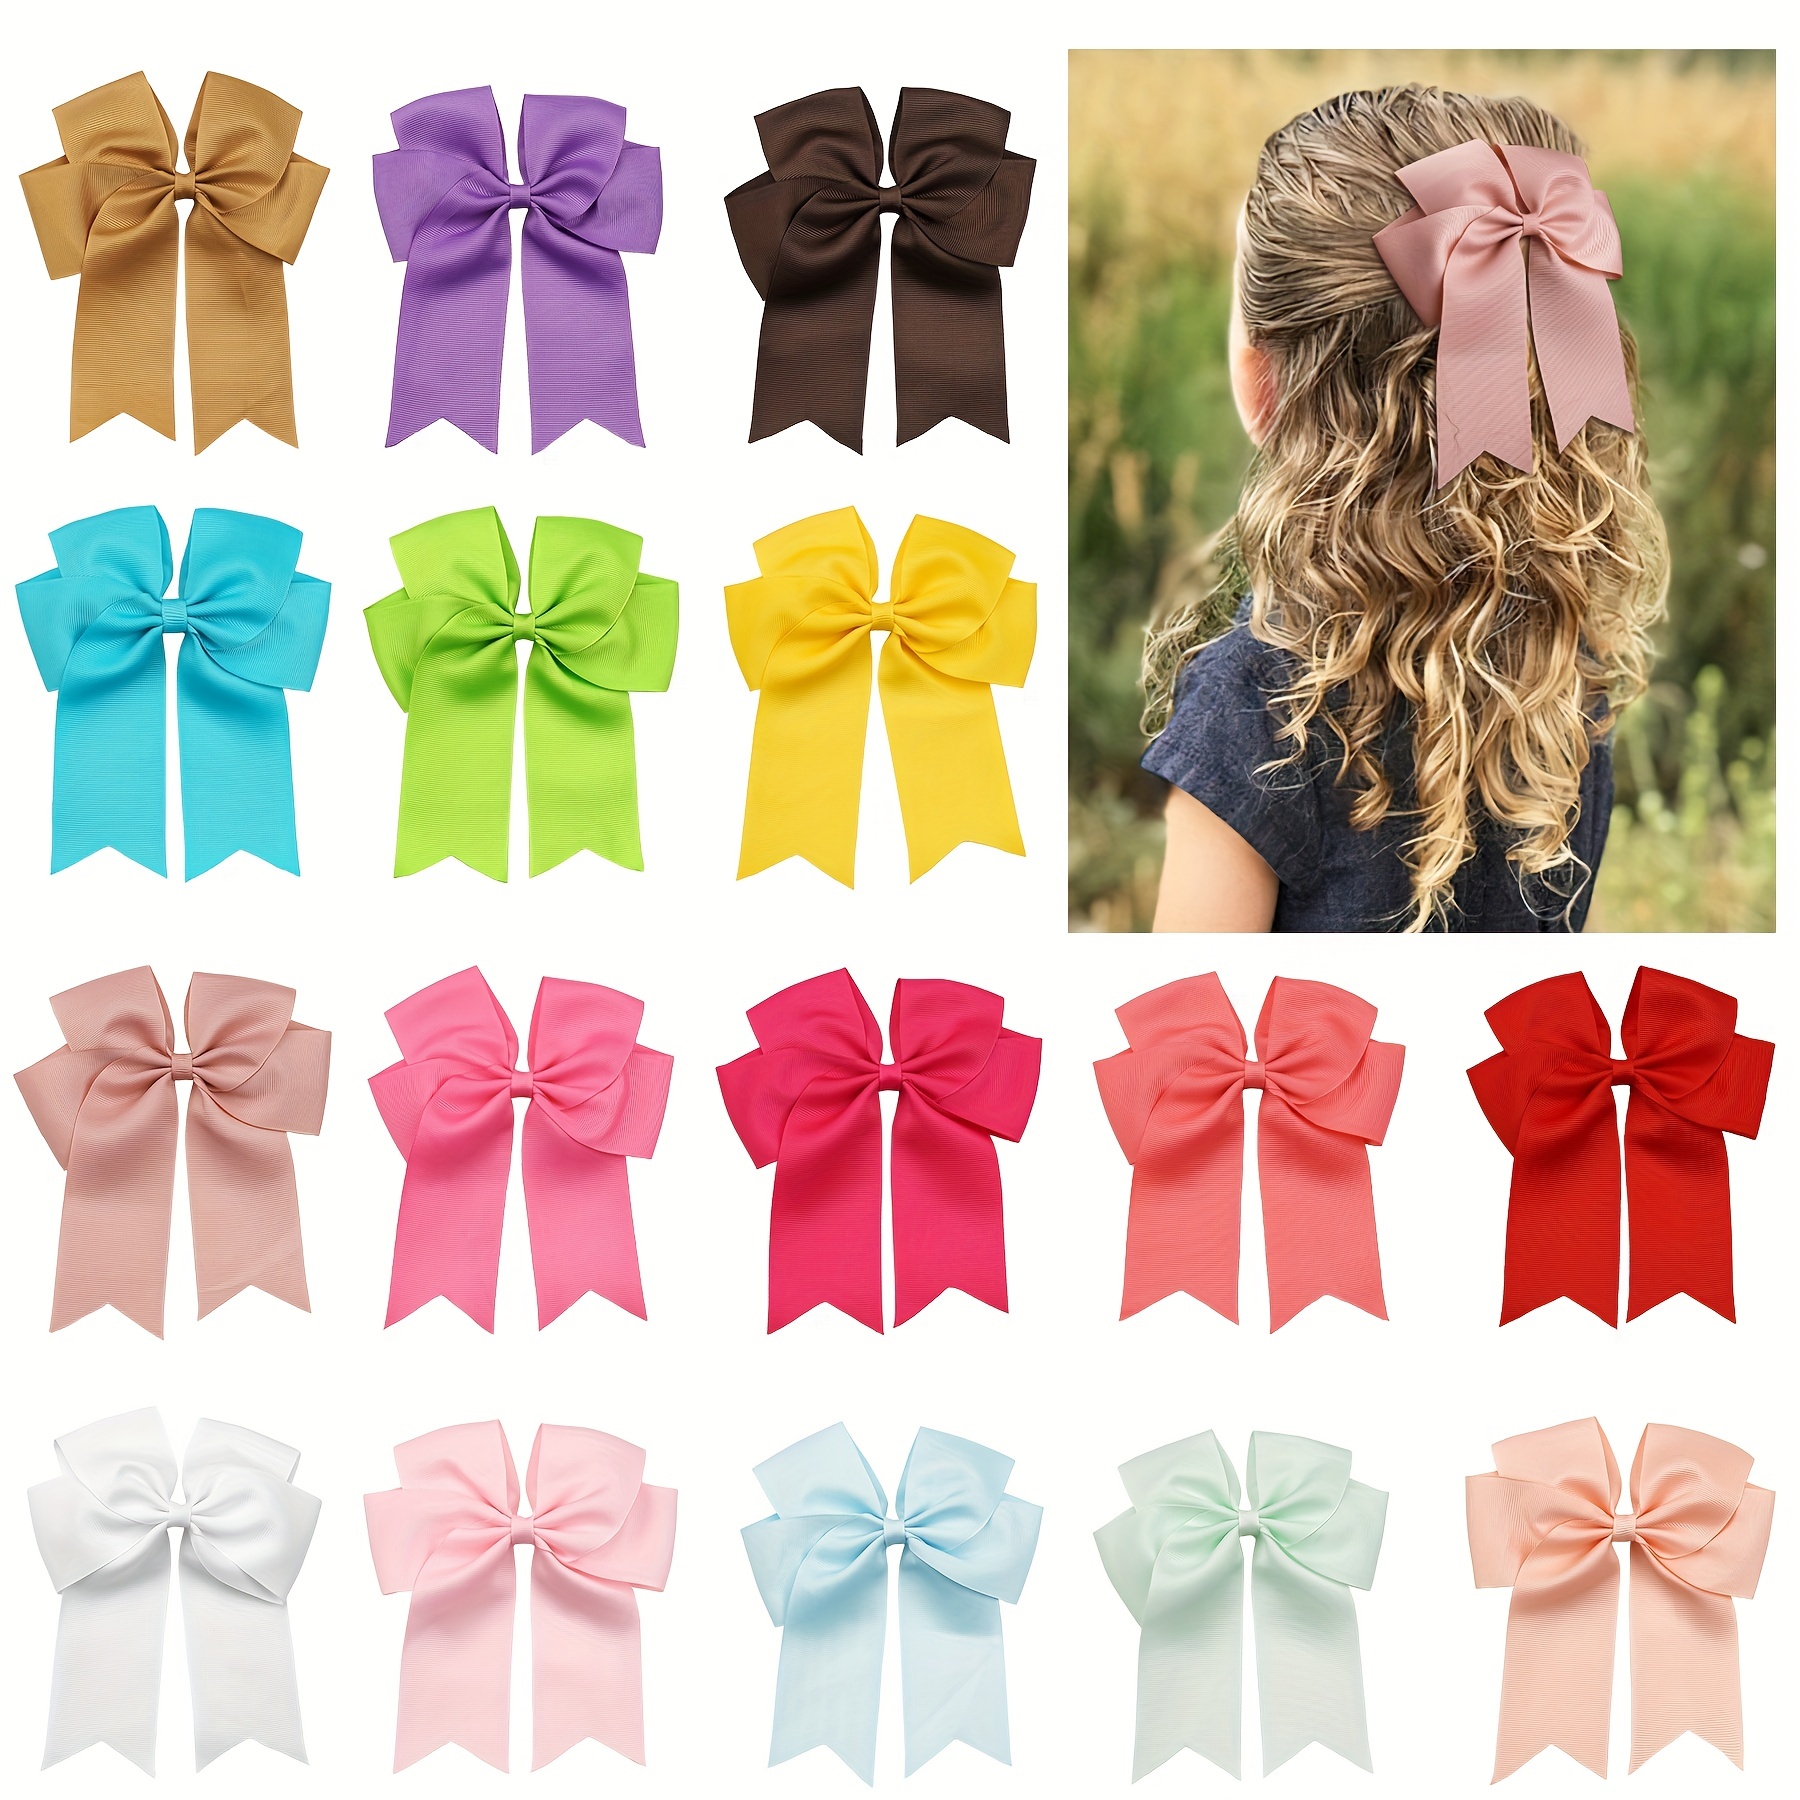 

20pcs Bow Streamer Hairpin Cute Bow Plain Color Hair Clips Children's Girls Accessories, Ideal Choice For Gifts